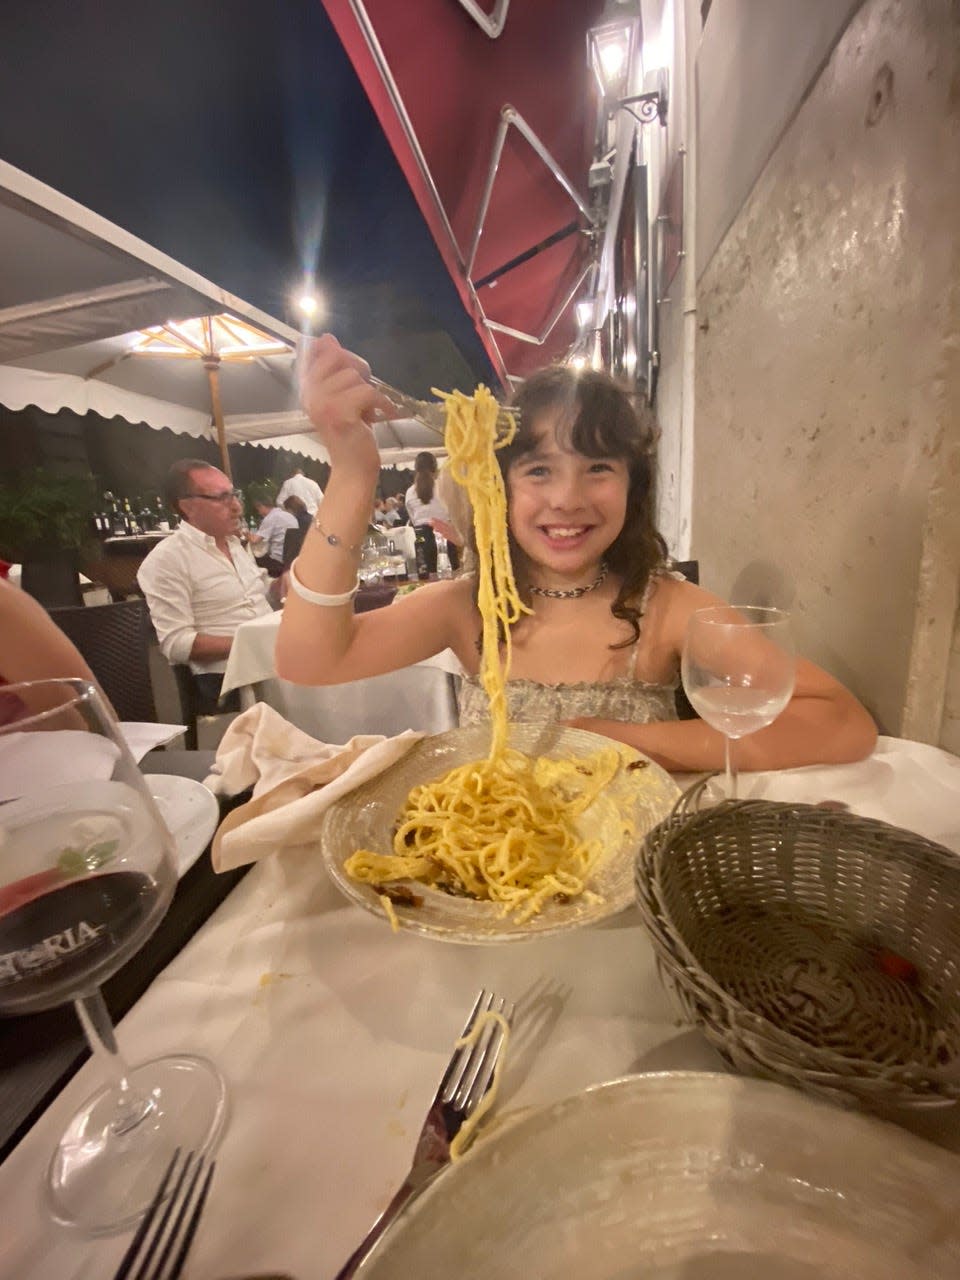 The author's daughter holding up a bite of cacio e pepe at a restaurant in Rome.